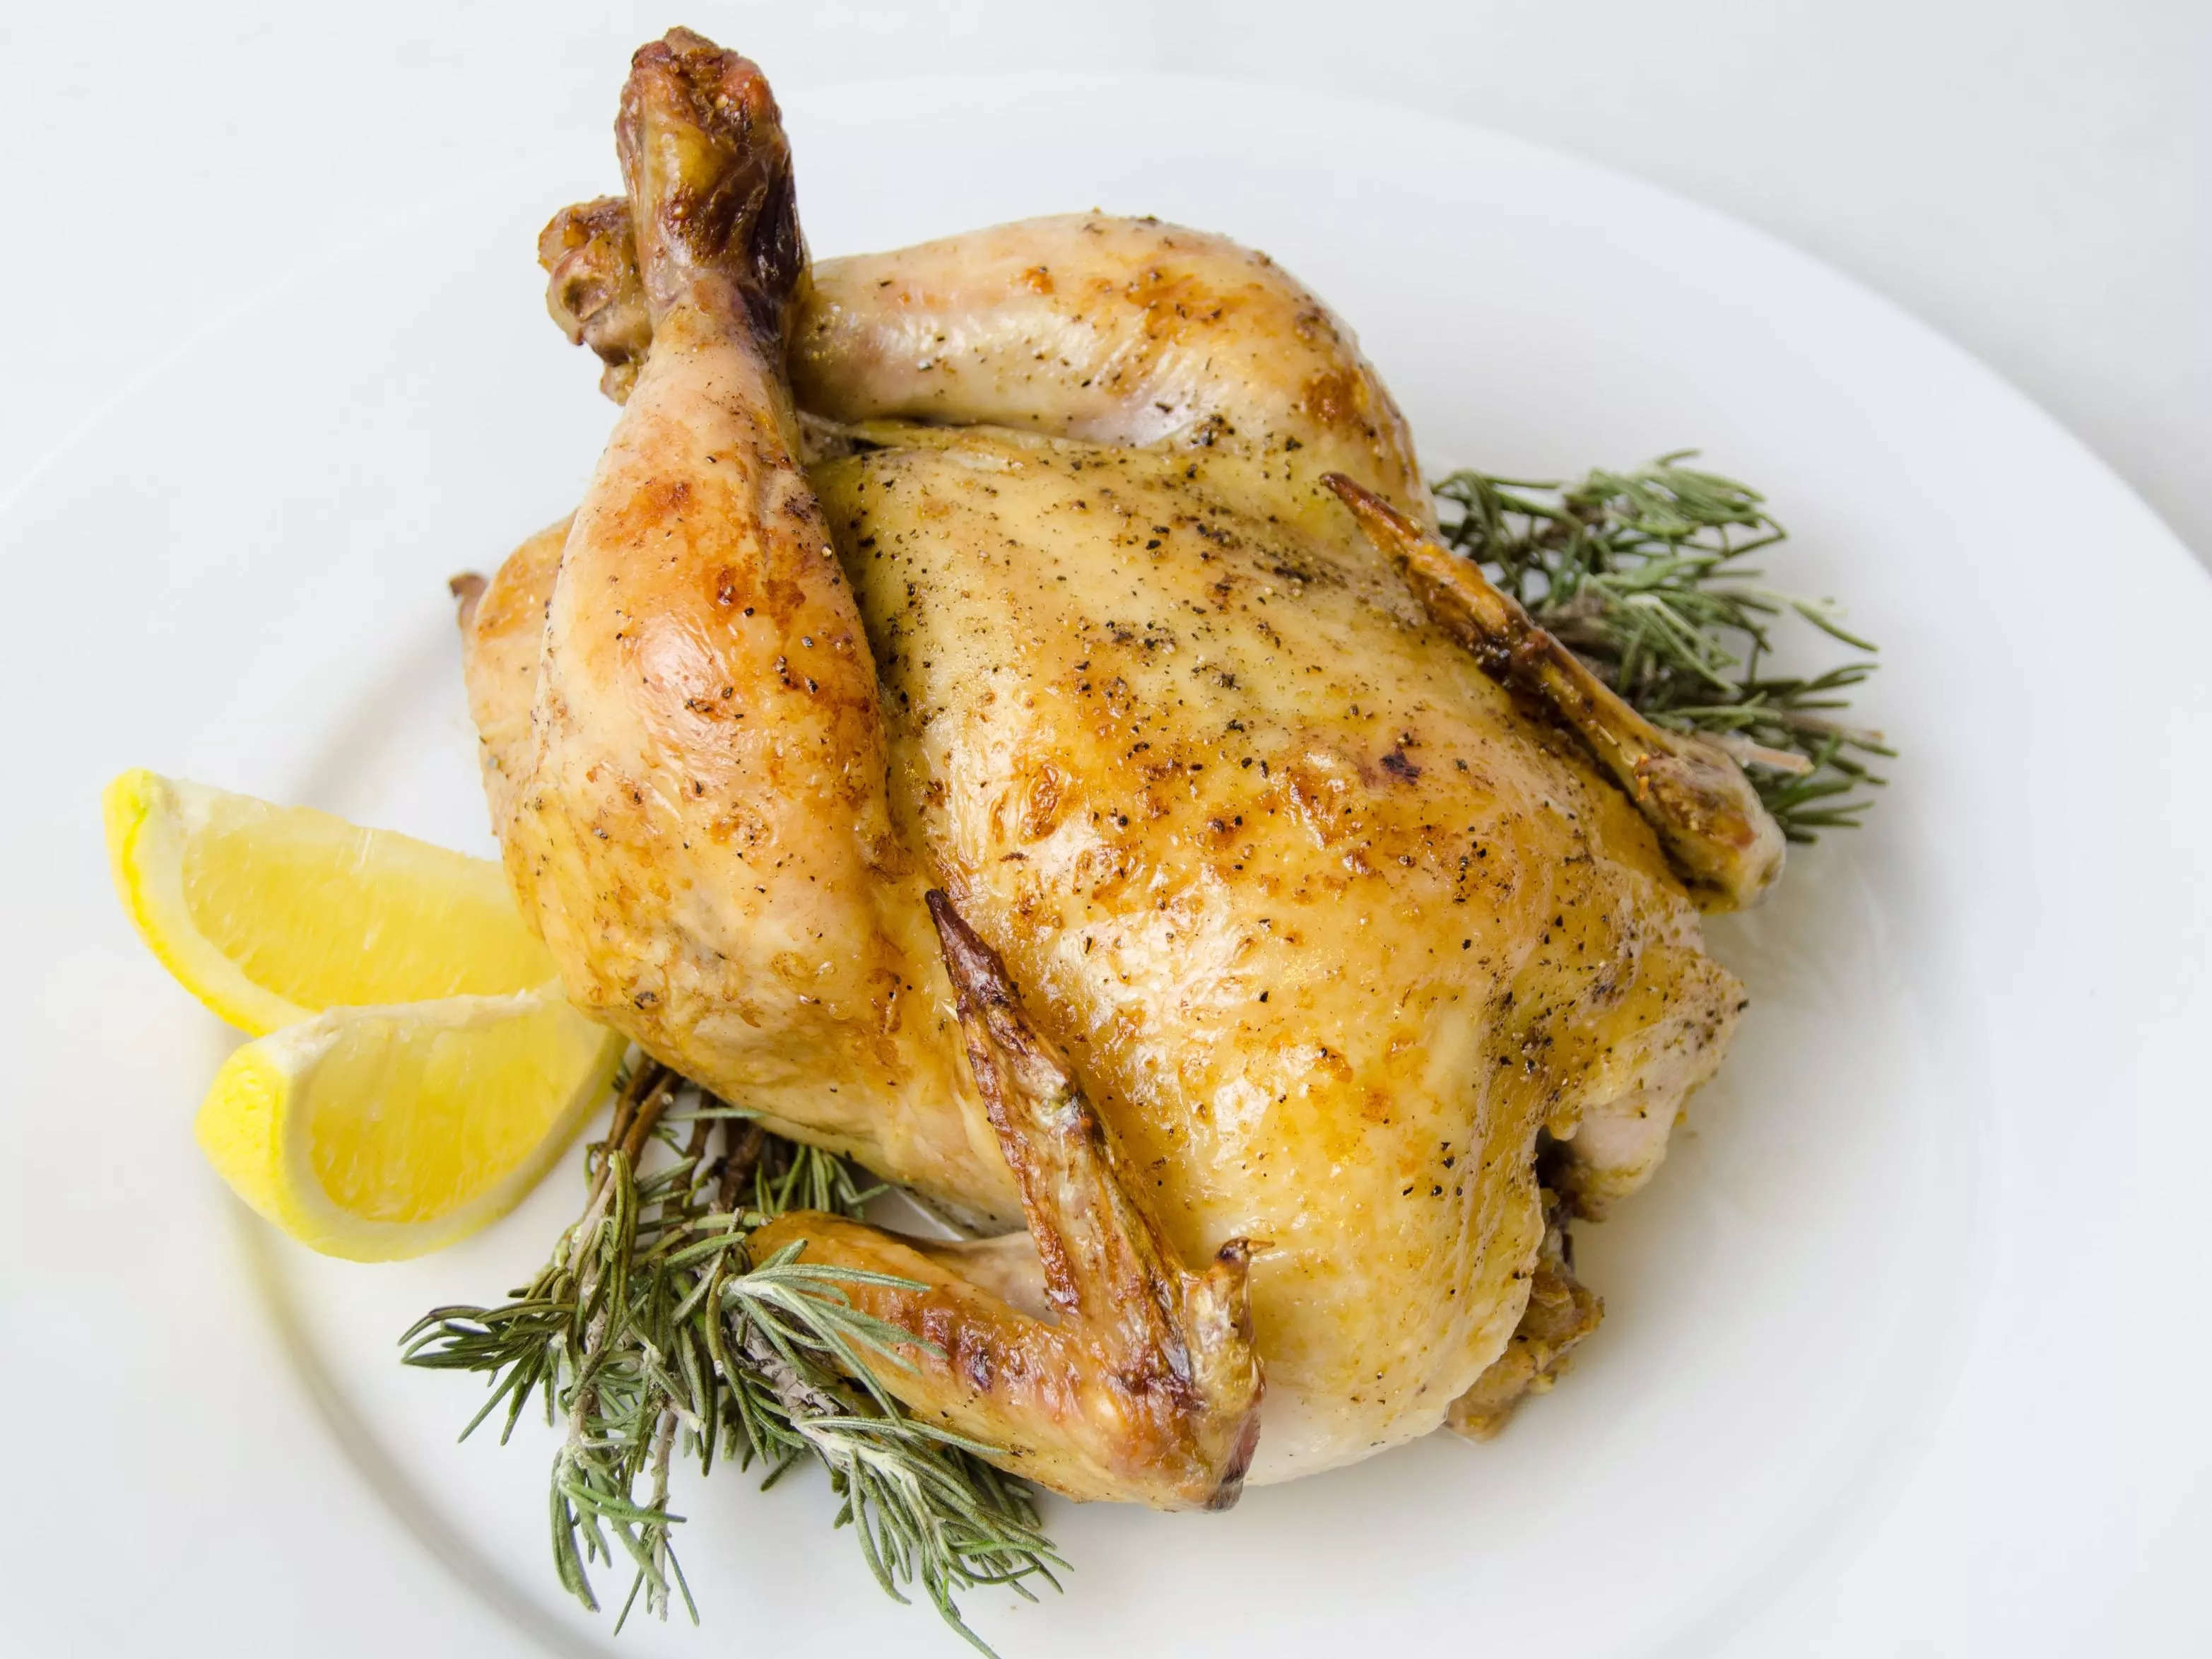 Cornish game hen plated with rosemary and lemon on a white plate